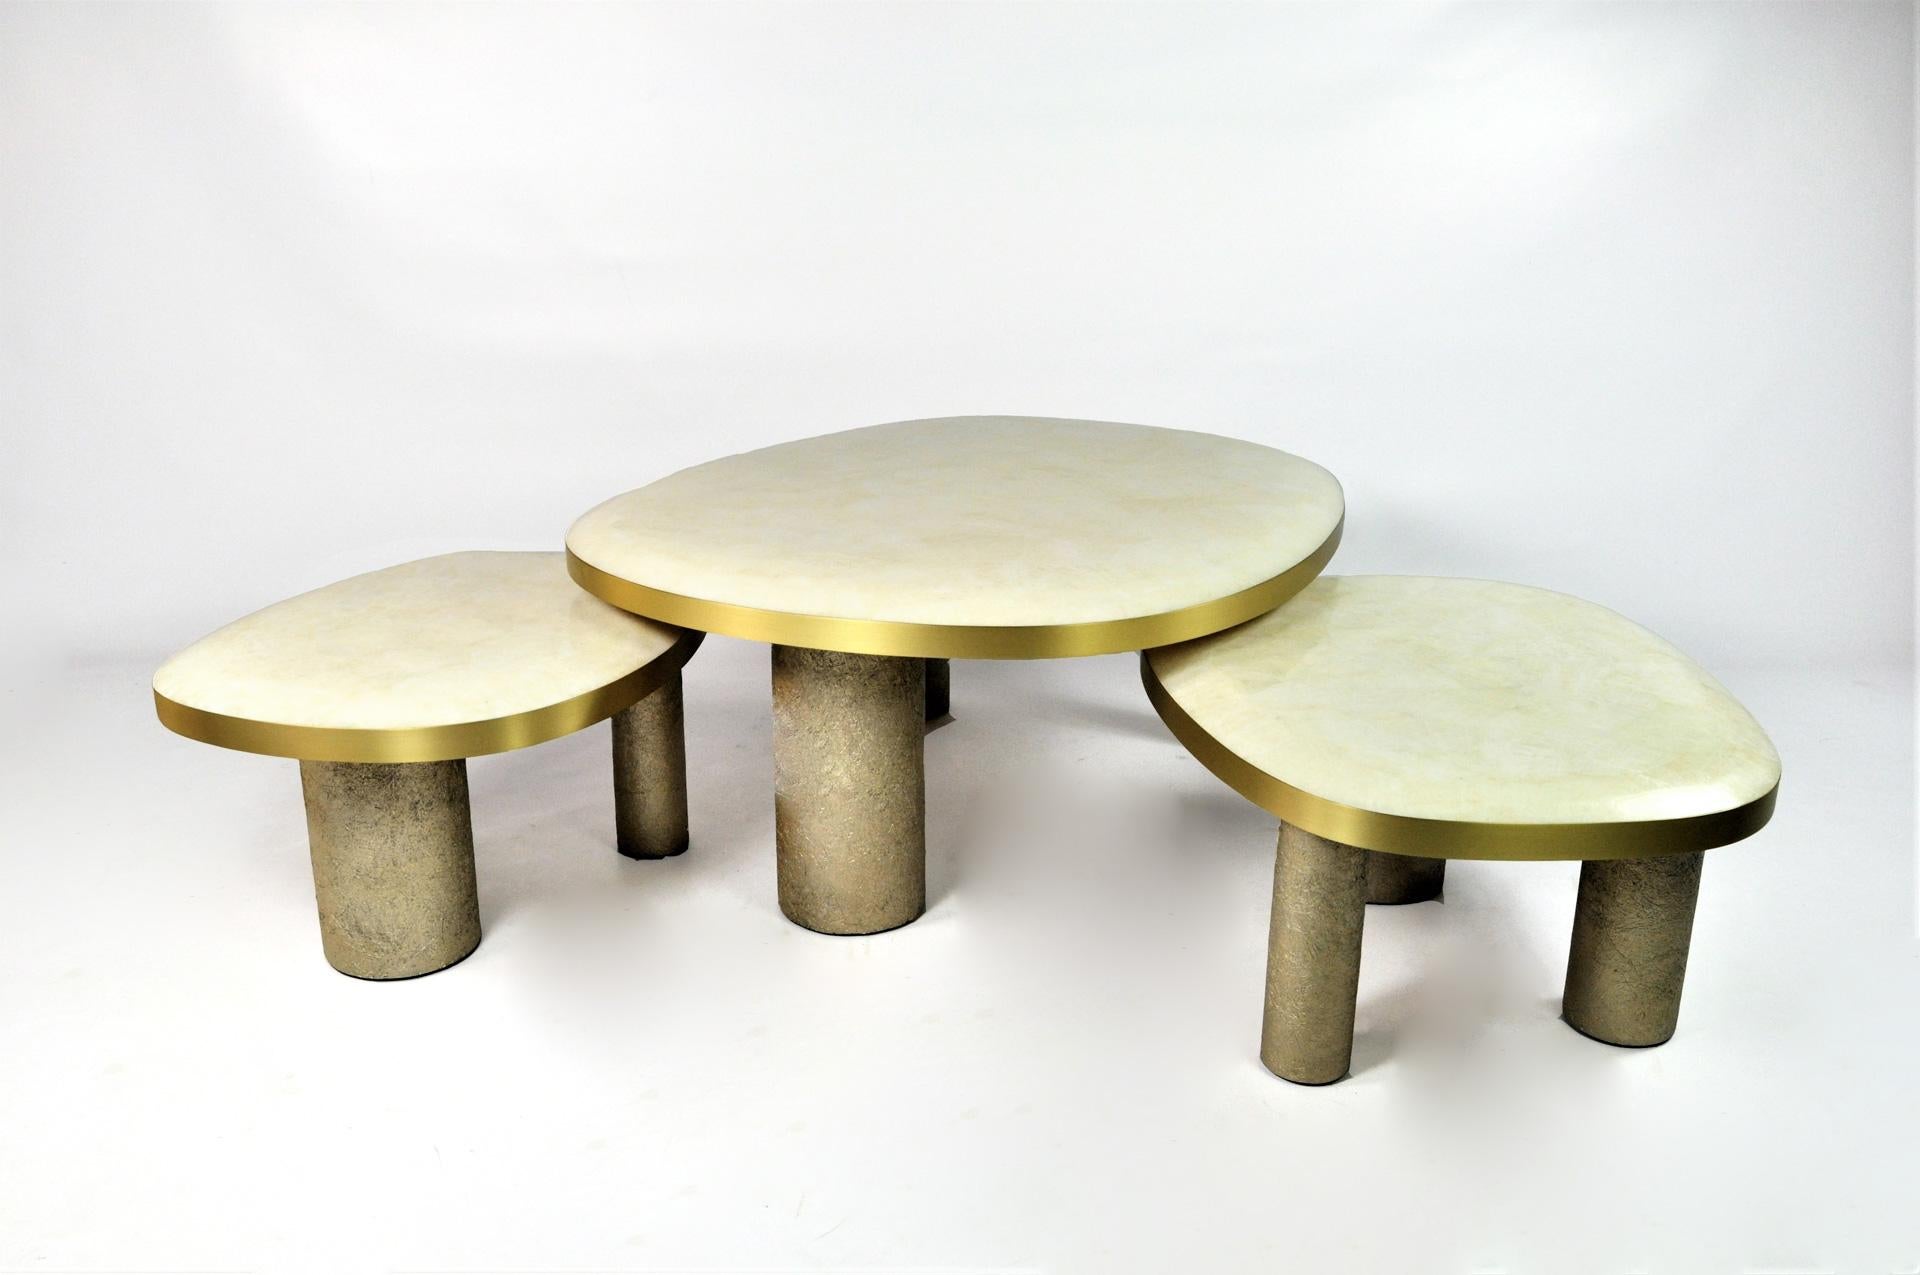 Organic Modern Set of 3 Coffee Tables in Rock Crystal and Brass by Ginger Brown